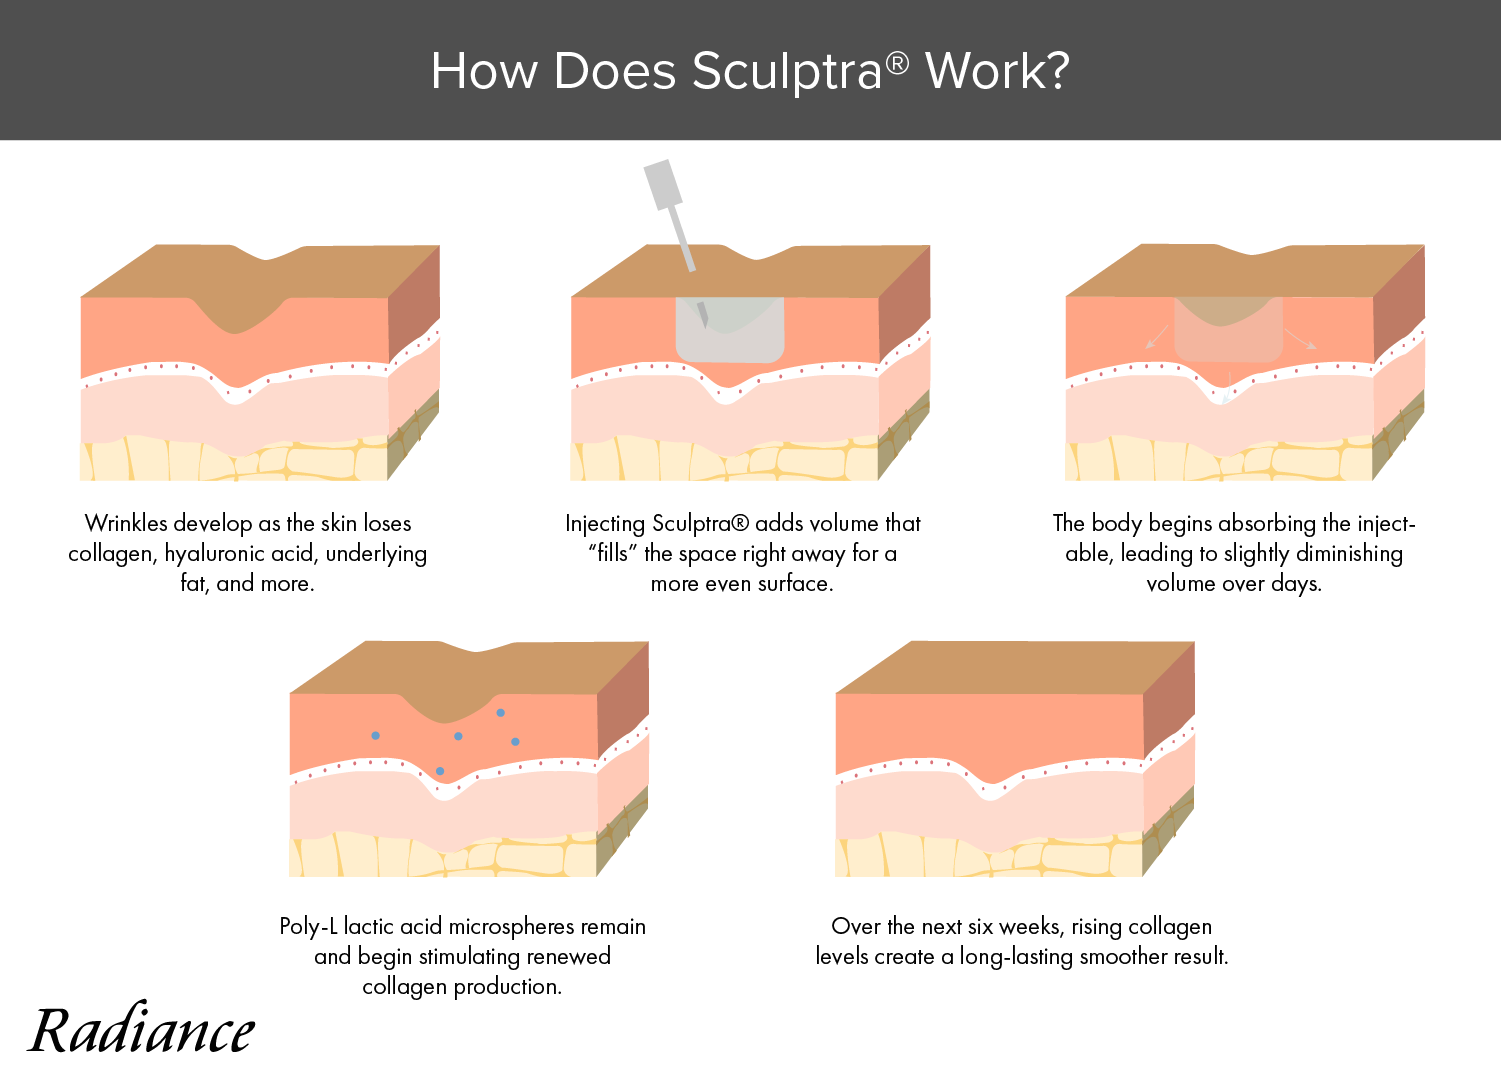 Learn what happens after injection with Sculptra at Madison, WI's Radiance Skin Therapy.